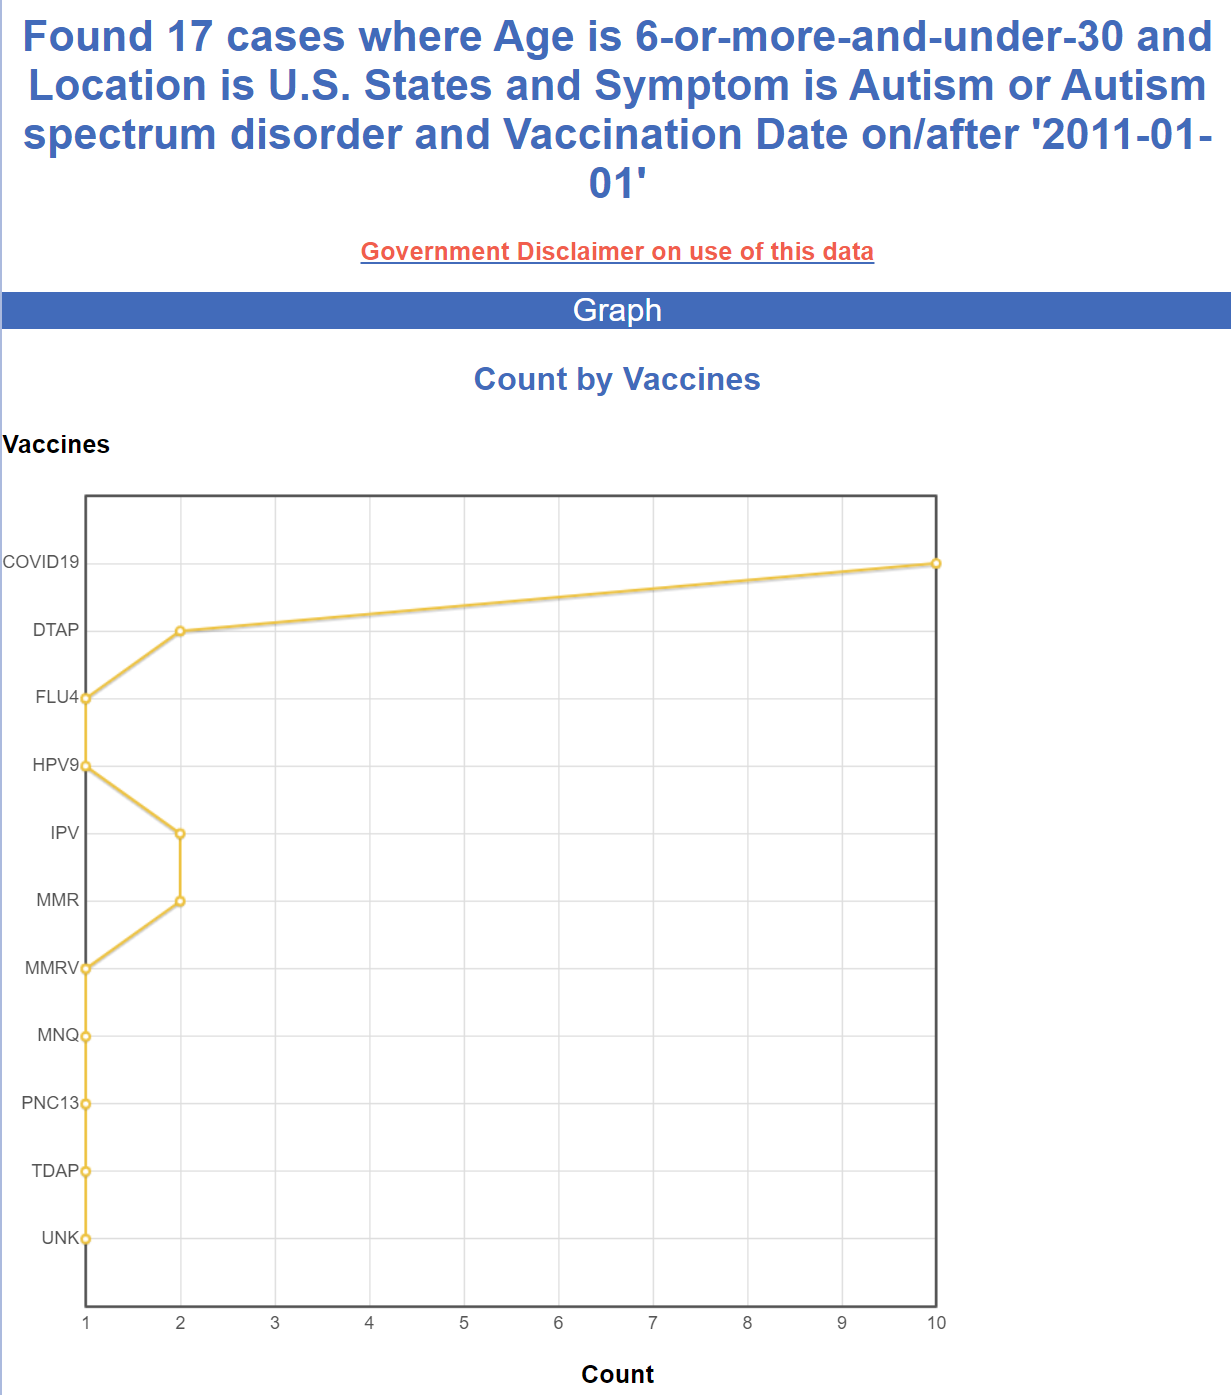 VAERS data shows that vaccines cause autism Https%3A%2F%2Fsubstack-post-media.s3.amazonaws.com%2Fpublic%2Fimages%2F3b2292e8-371c-416d-8ed5-2234c3f9191a_1231x1395